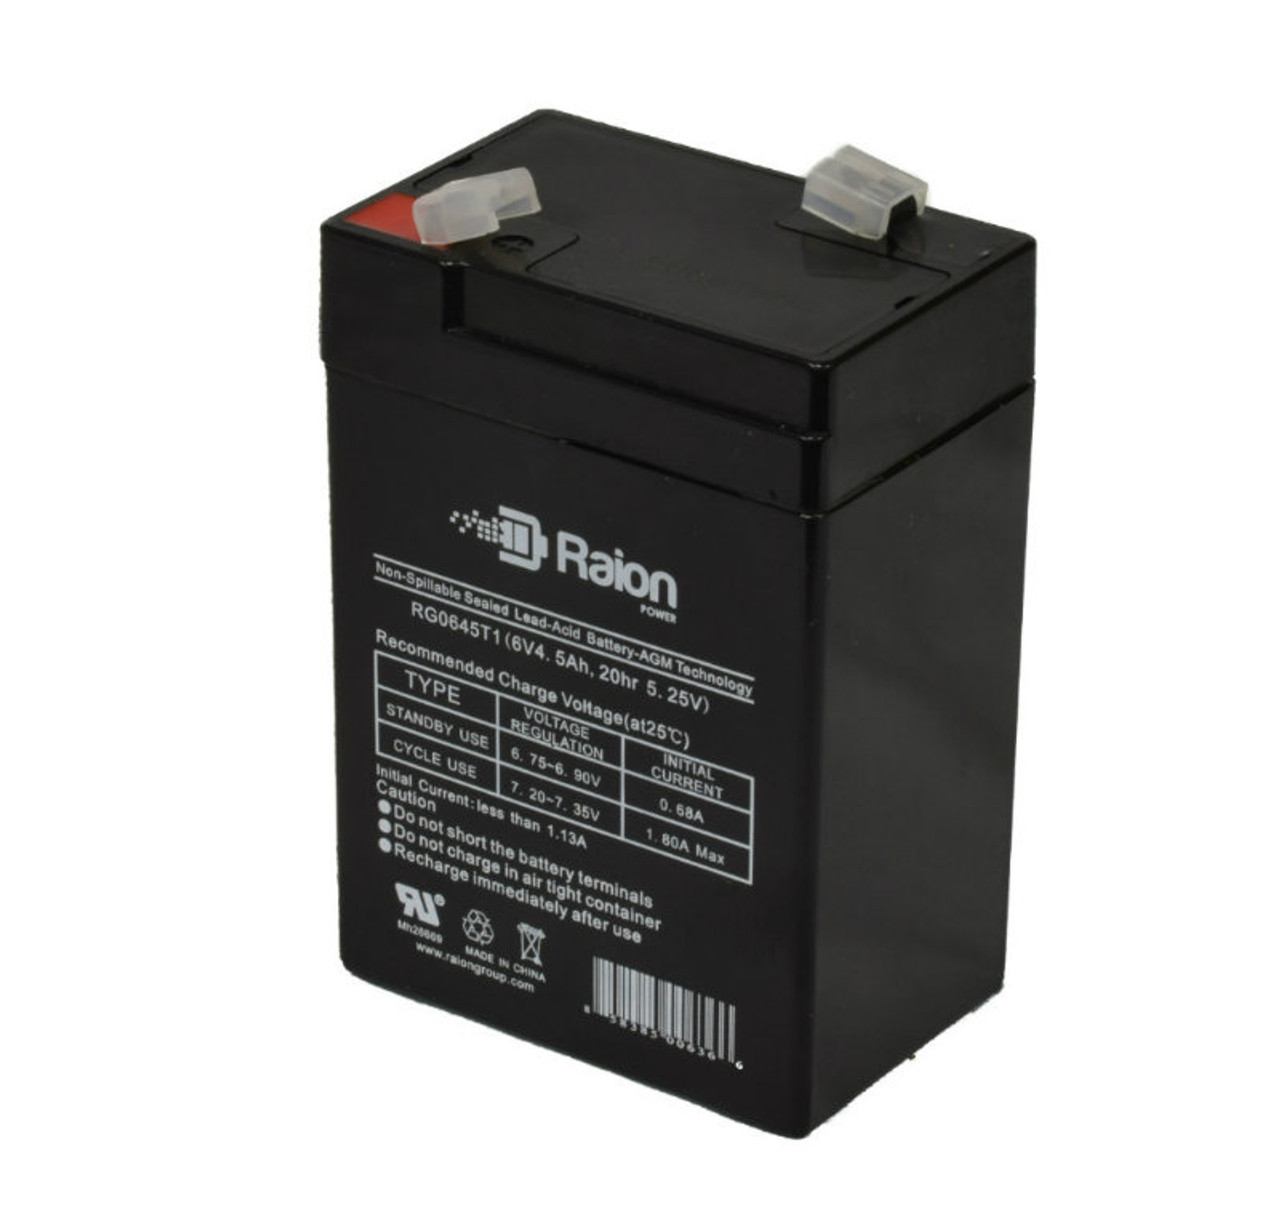 Raion Power RG0645T1 6V 4.5Ah Replacement Battery Cartridge for Power Kingdom PS5-6